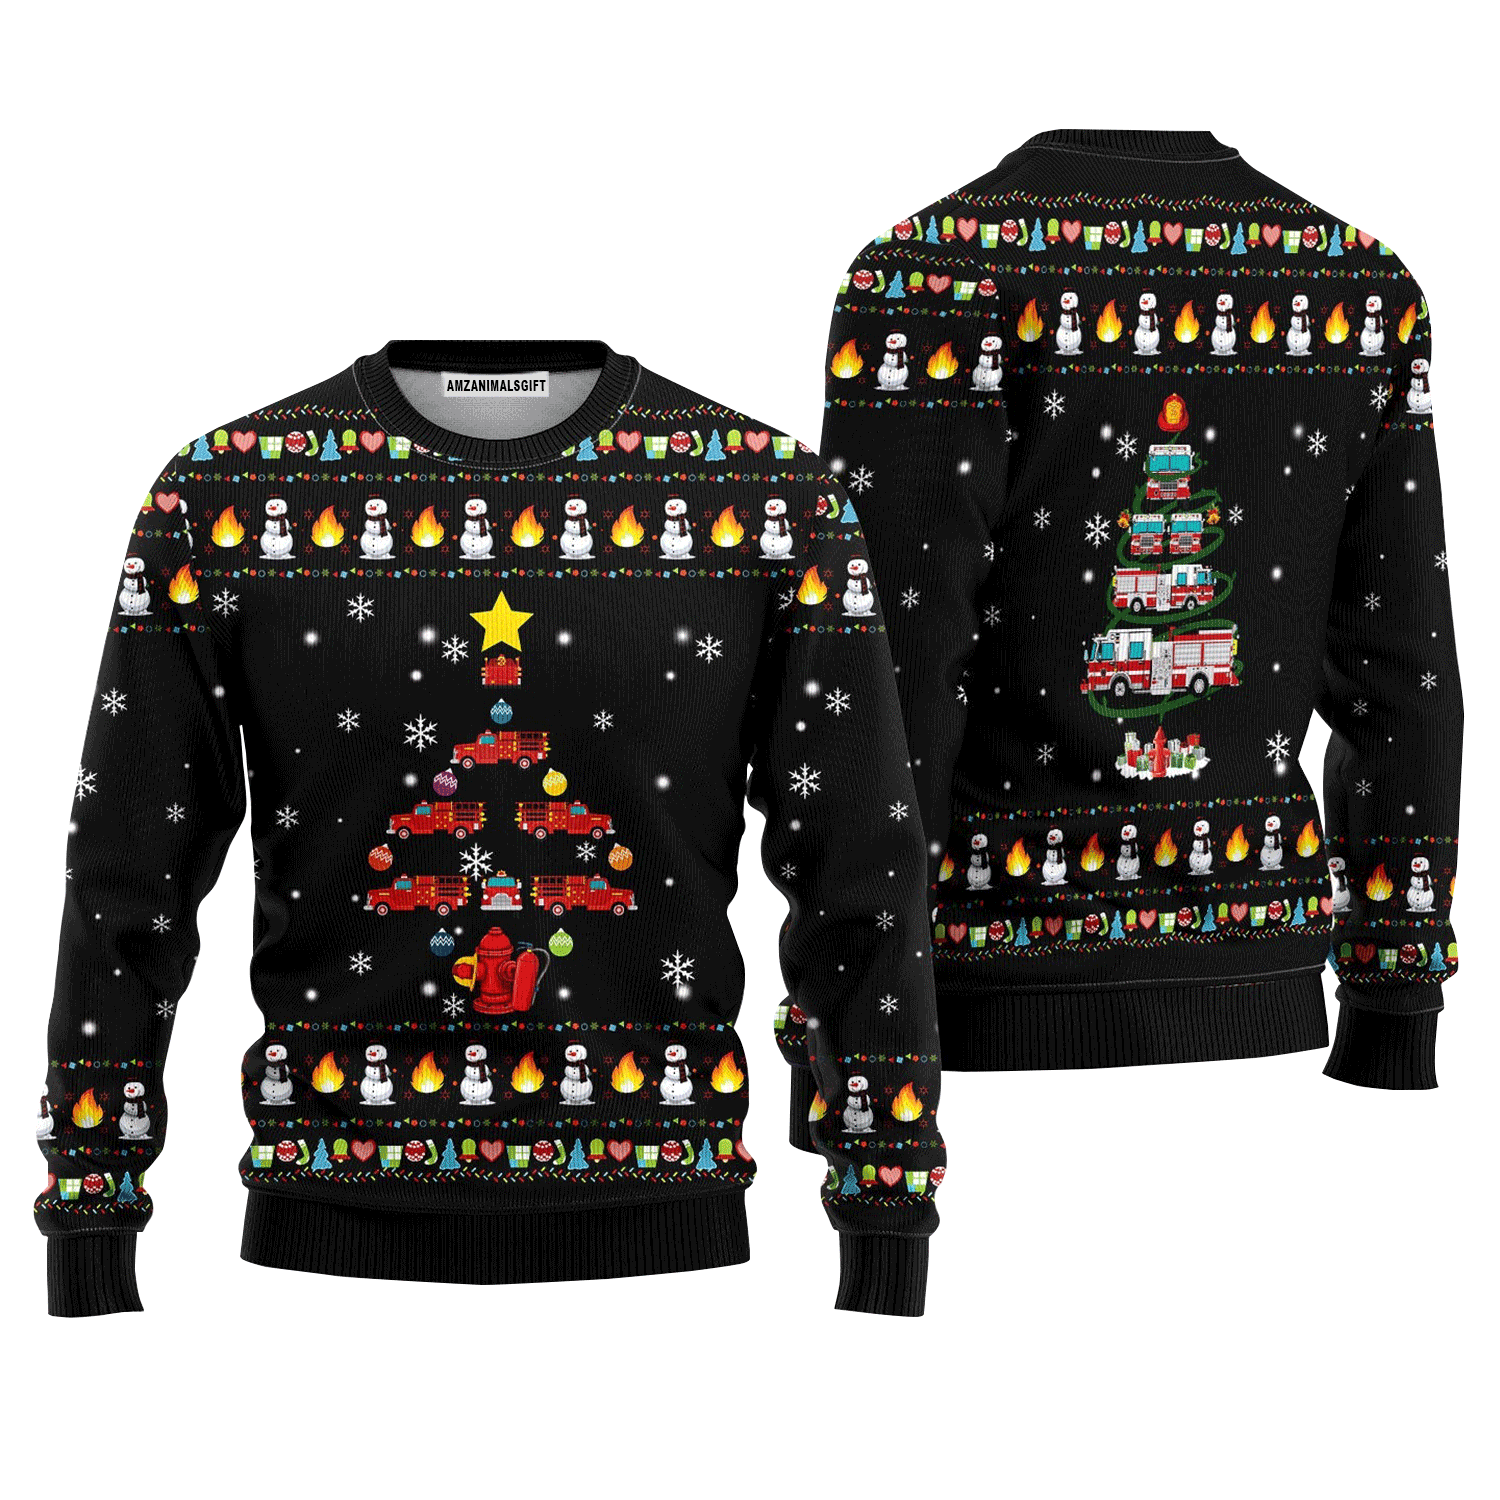 Firetruck Christmas Tree Sweater, Ugly Sweater For Men & Women, Perfect Outfit For Christmas New Year Autumn Winter